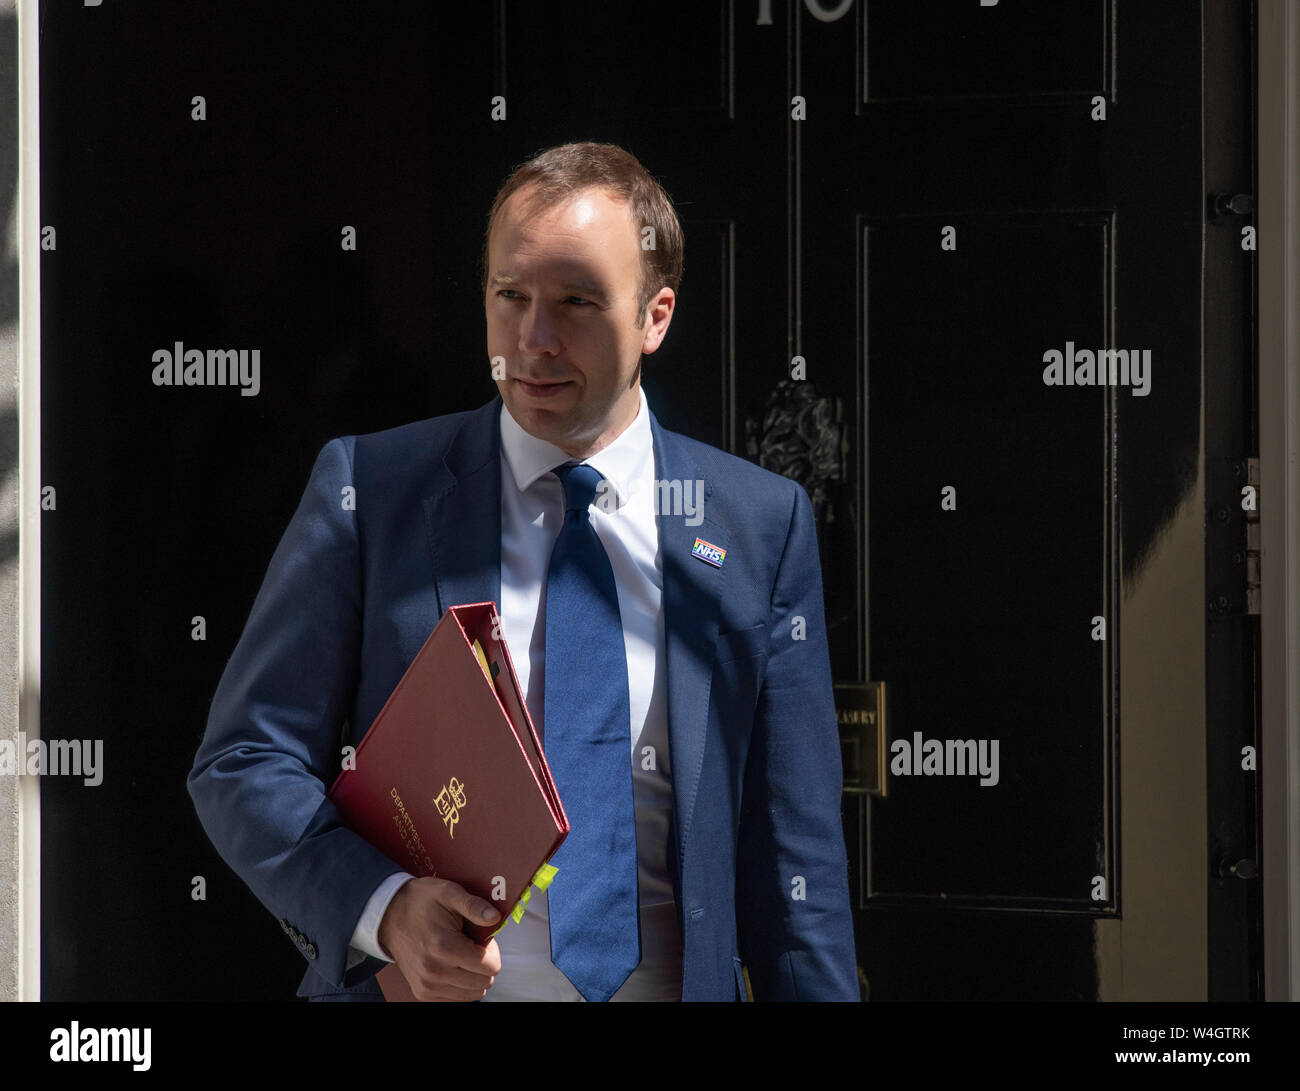 Downing Street, London, UK. 23rd July 2019. Matt Hancock, Secretary of State for Health and Social Care, leaves 10 Downing Street after final cabinet meeting chaired by PM Theresa May and before Boris Johnson is announced as new PM. Credit: Malcolm Park/Alamy Live News. Stock Photo